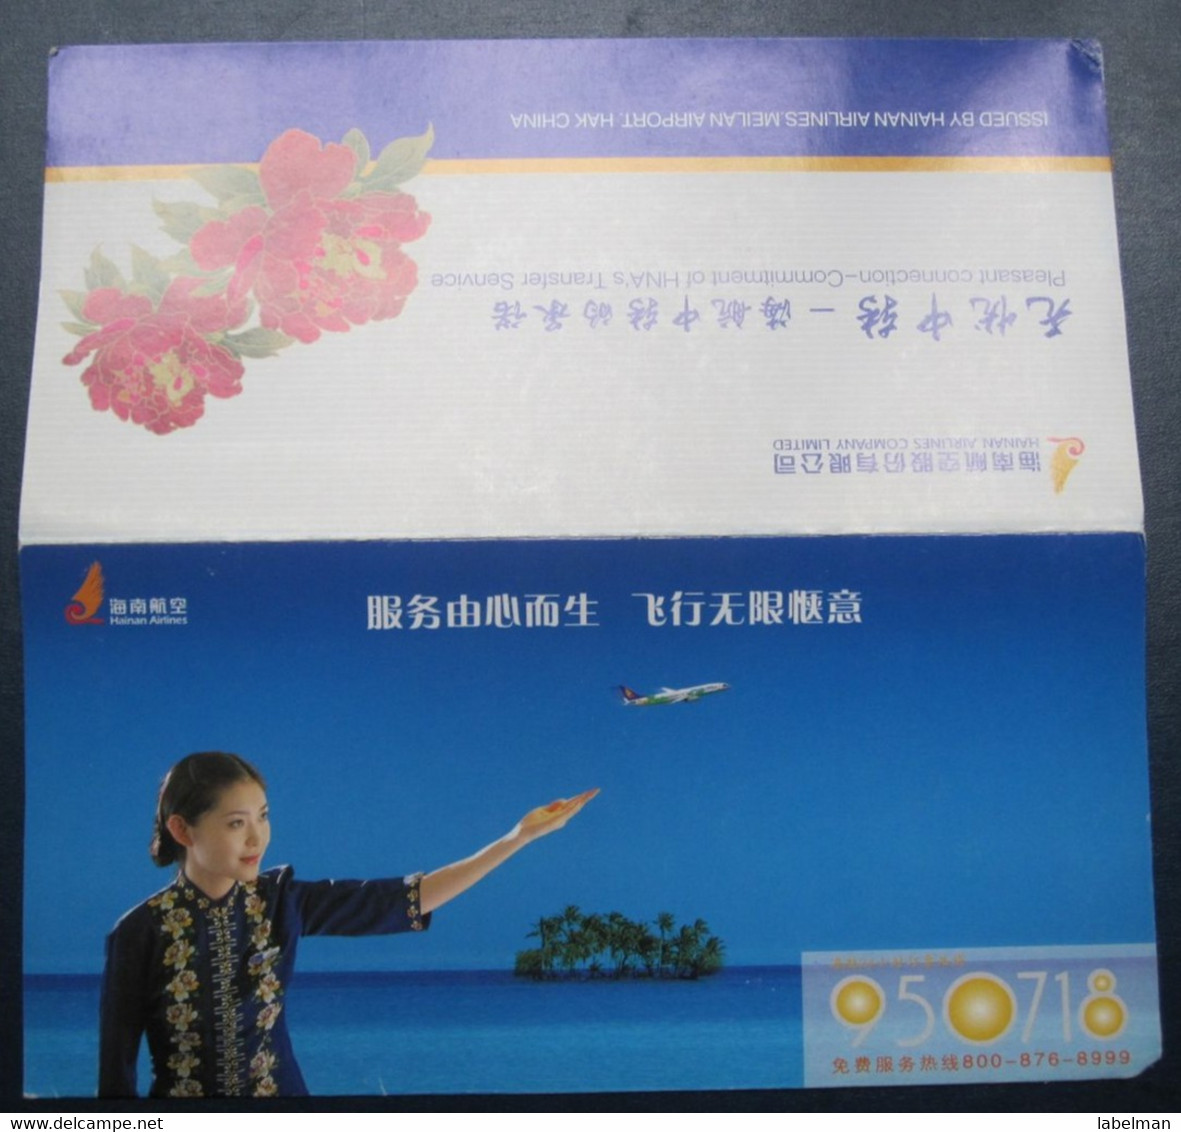 HAINAN MEILAN CHINA AIRWAYS AIRLINE TICKET HOLDER BOOKLET VIP TAG LUGGAGE BAGGAGE PLANE AIRCRAFT AIRPORT - Mundo